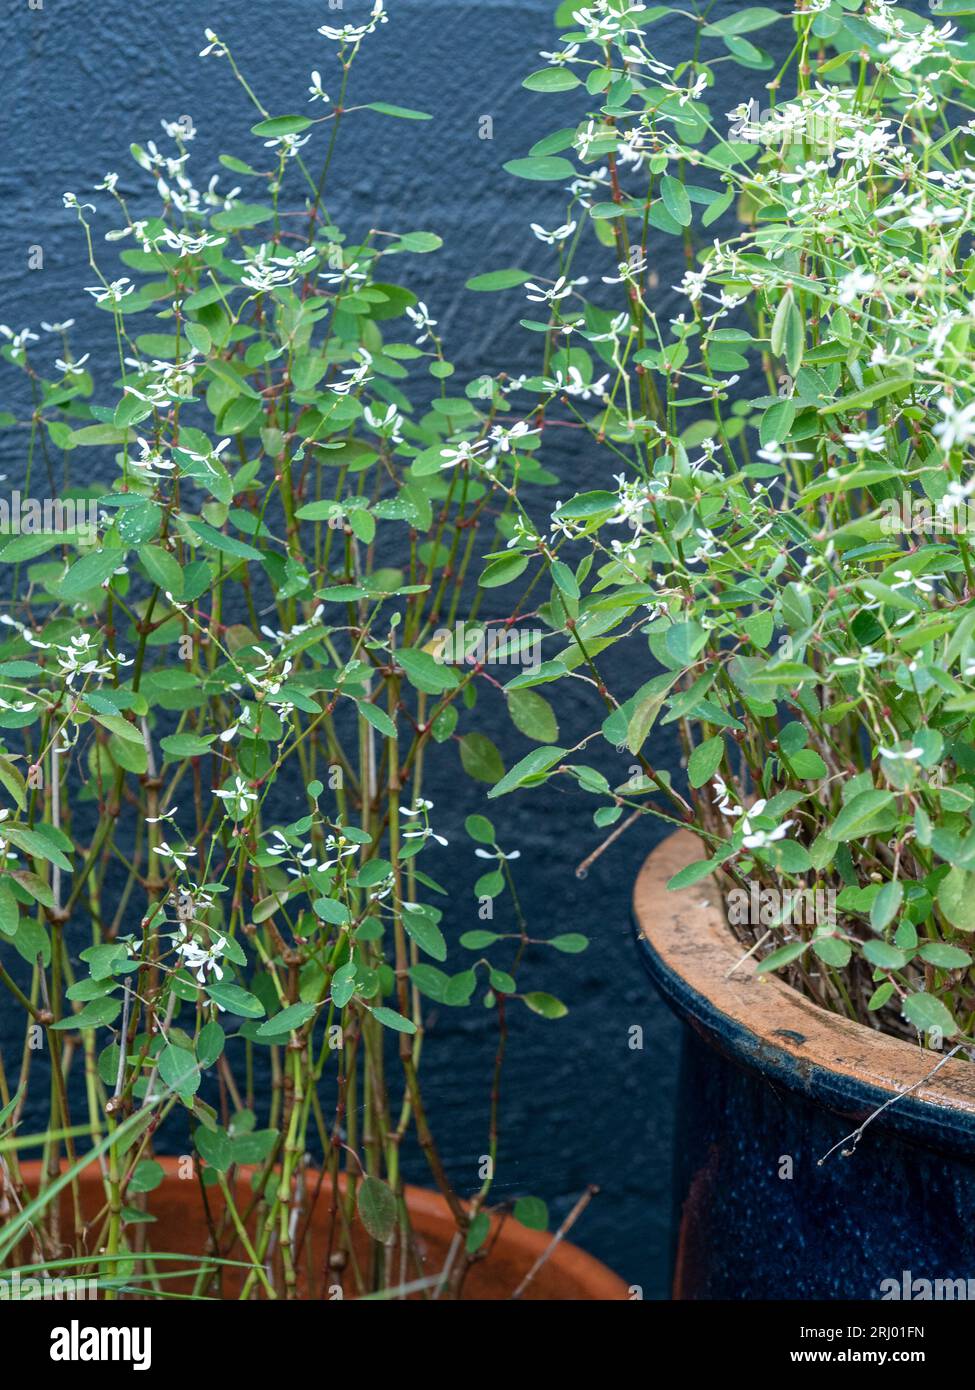 Two Pots of plants with white flowers and green leaves, Euphorbia Diamond Frost, potplants Stock Photo